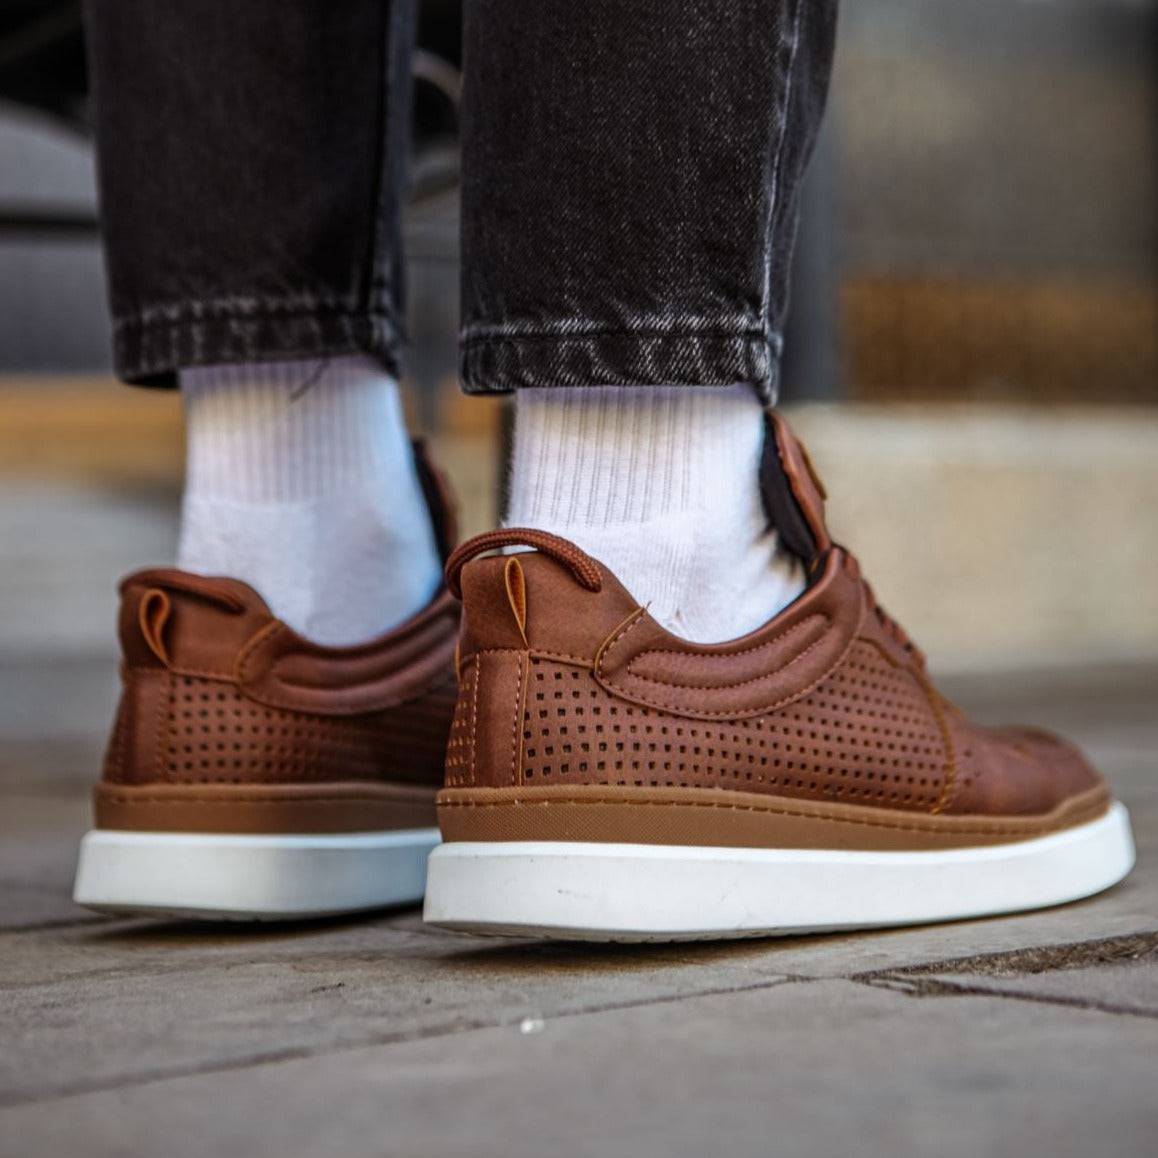 Low Top Casual Brogue Pattern Sneakers for Men by Apollo Moda | Hercules Earthy Charm